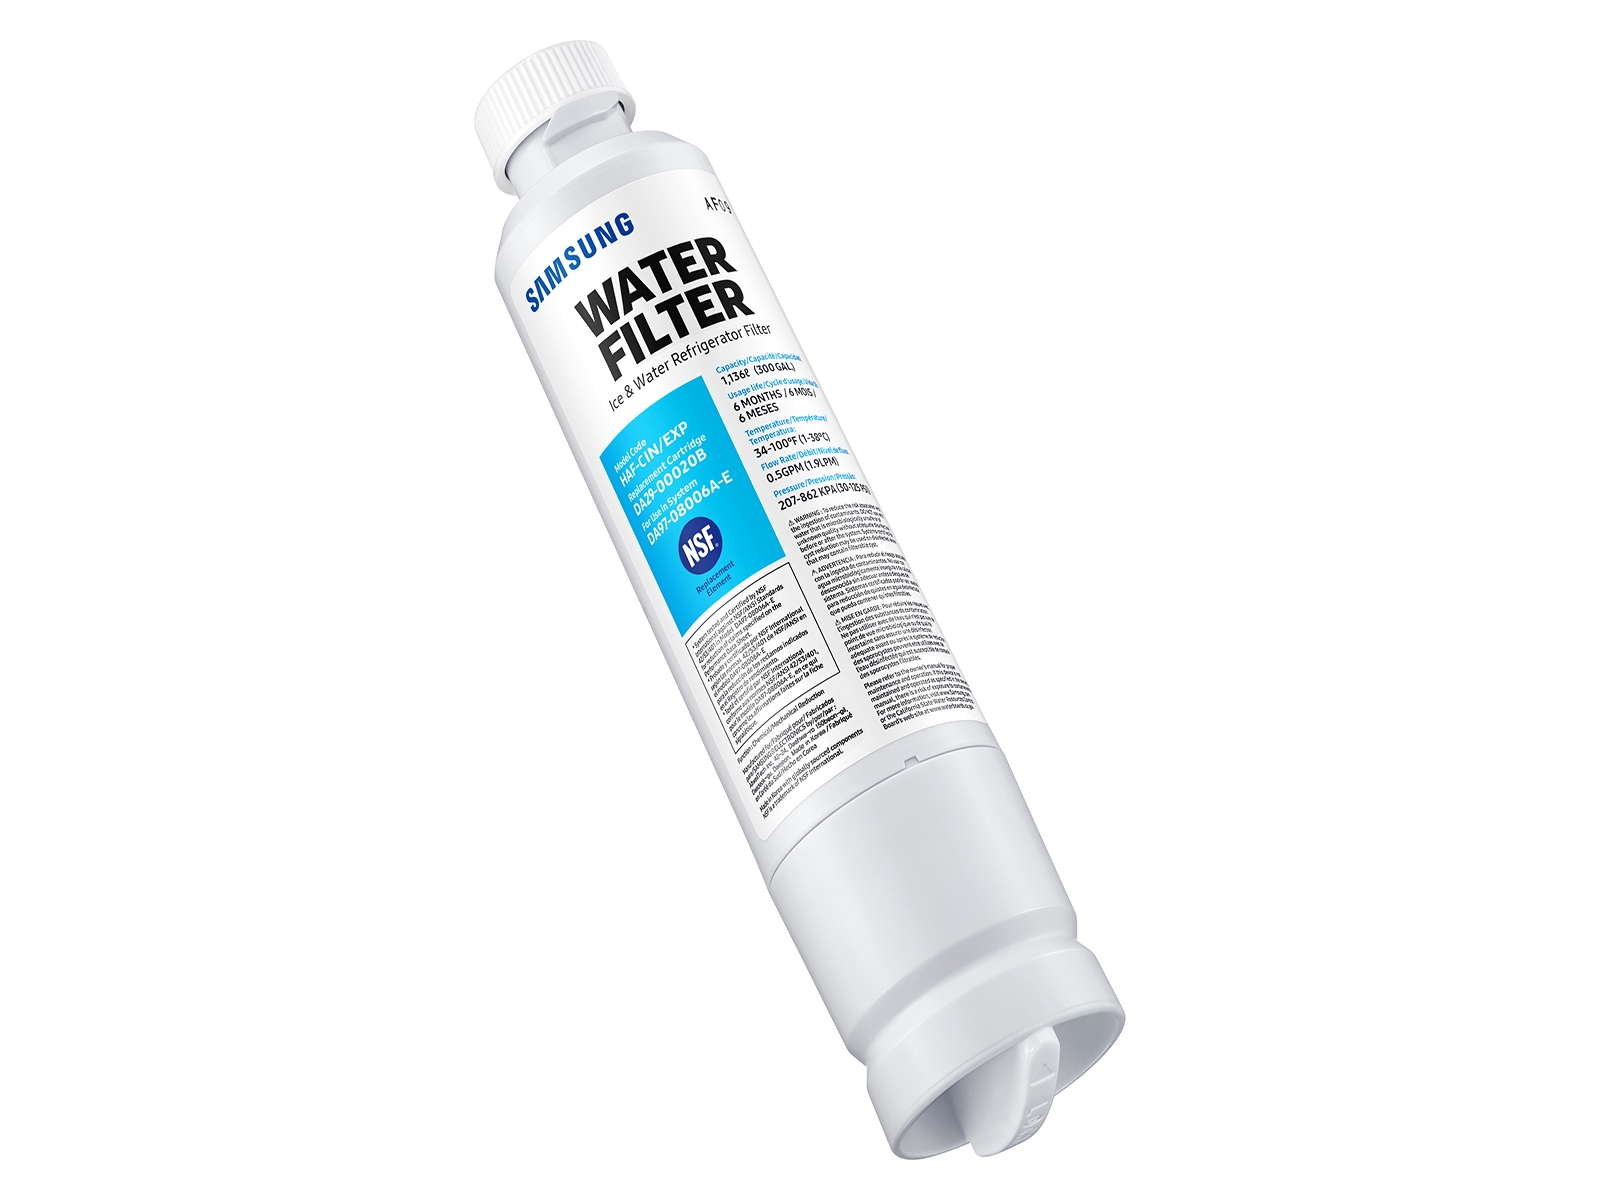 Refrigerator Water Filter Cross Reference Chart